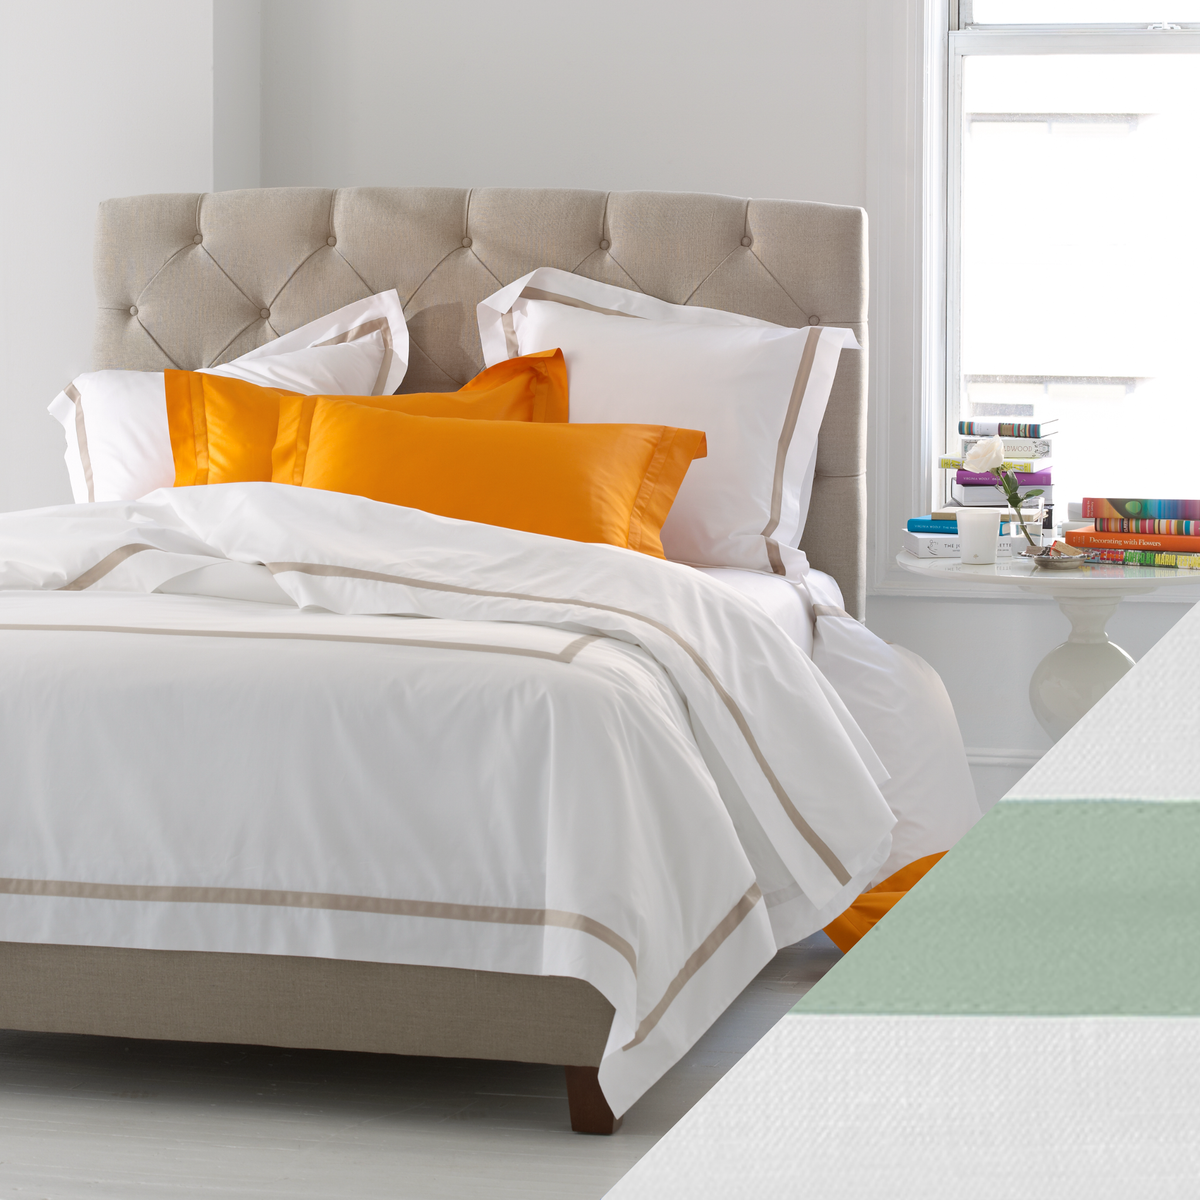 Full Bed in Lowell Bedding Collection with Celadon Swatch